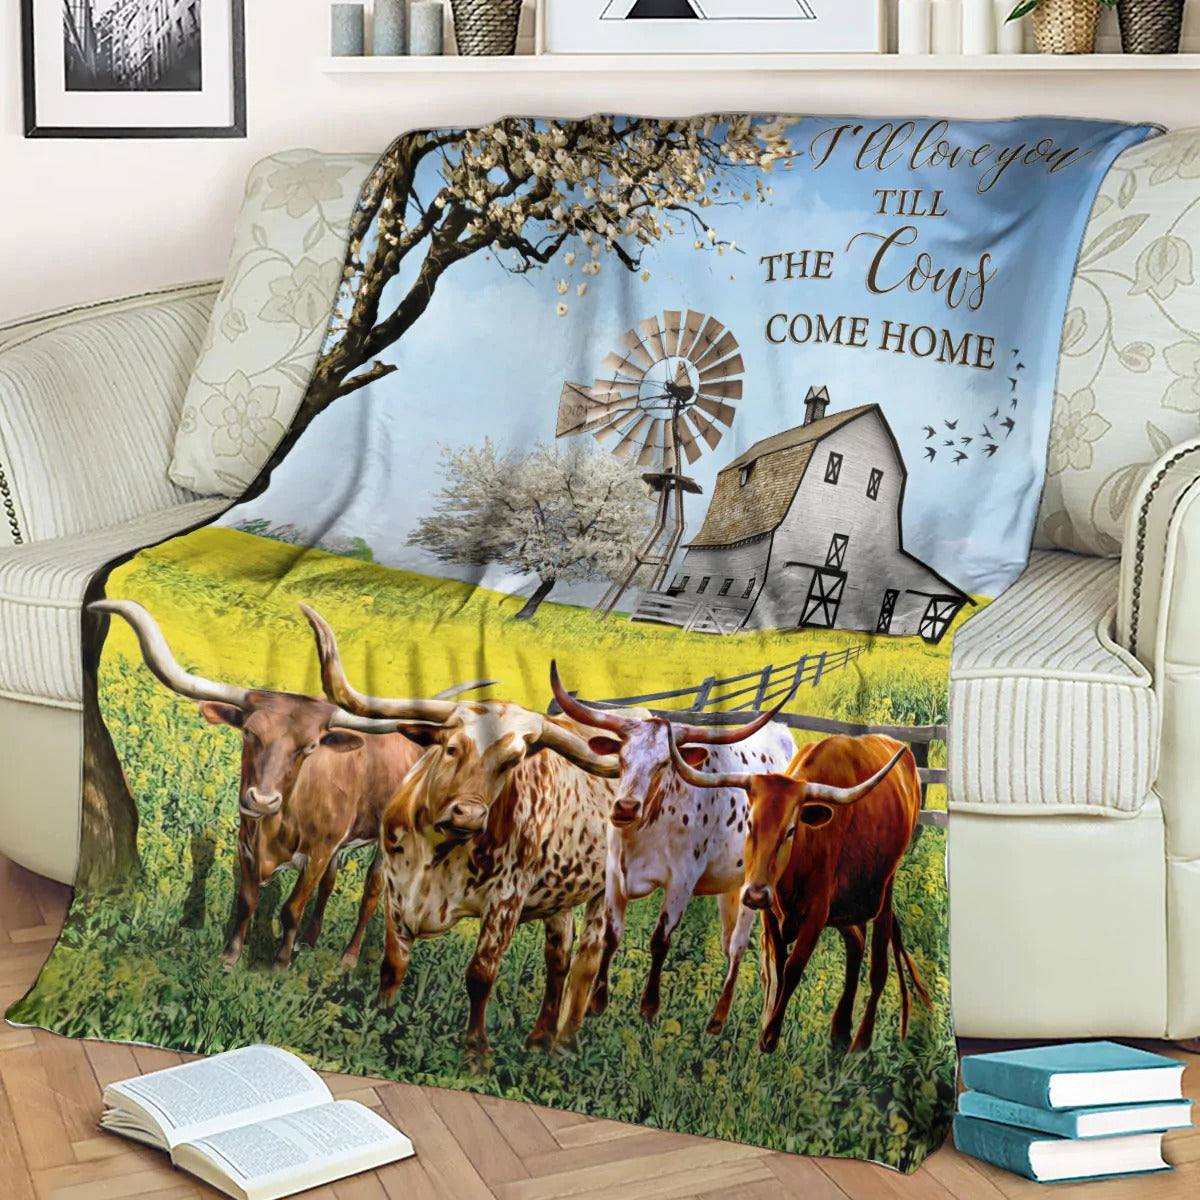 Texas Longhorn Fleece Blanket/ Love You Till The Cows Come Home Blanket/ Sofa Bedding Decoration For Cow Lover/ Cow Animal Blanket For Him Her